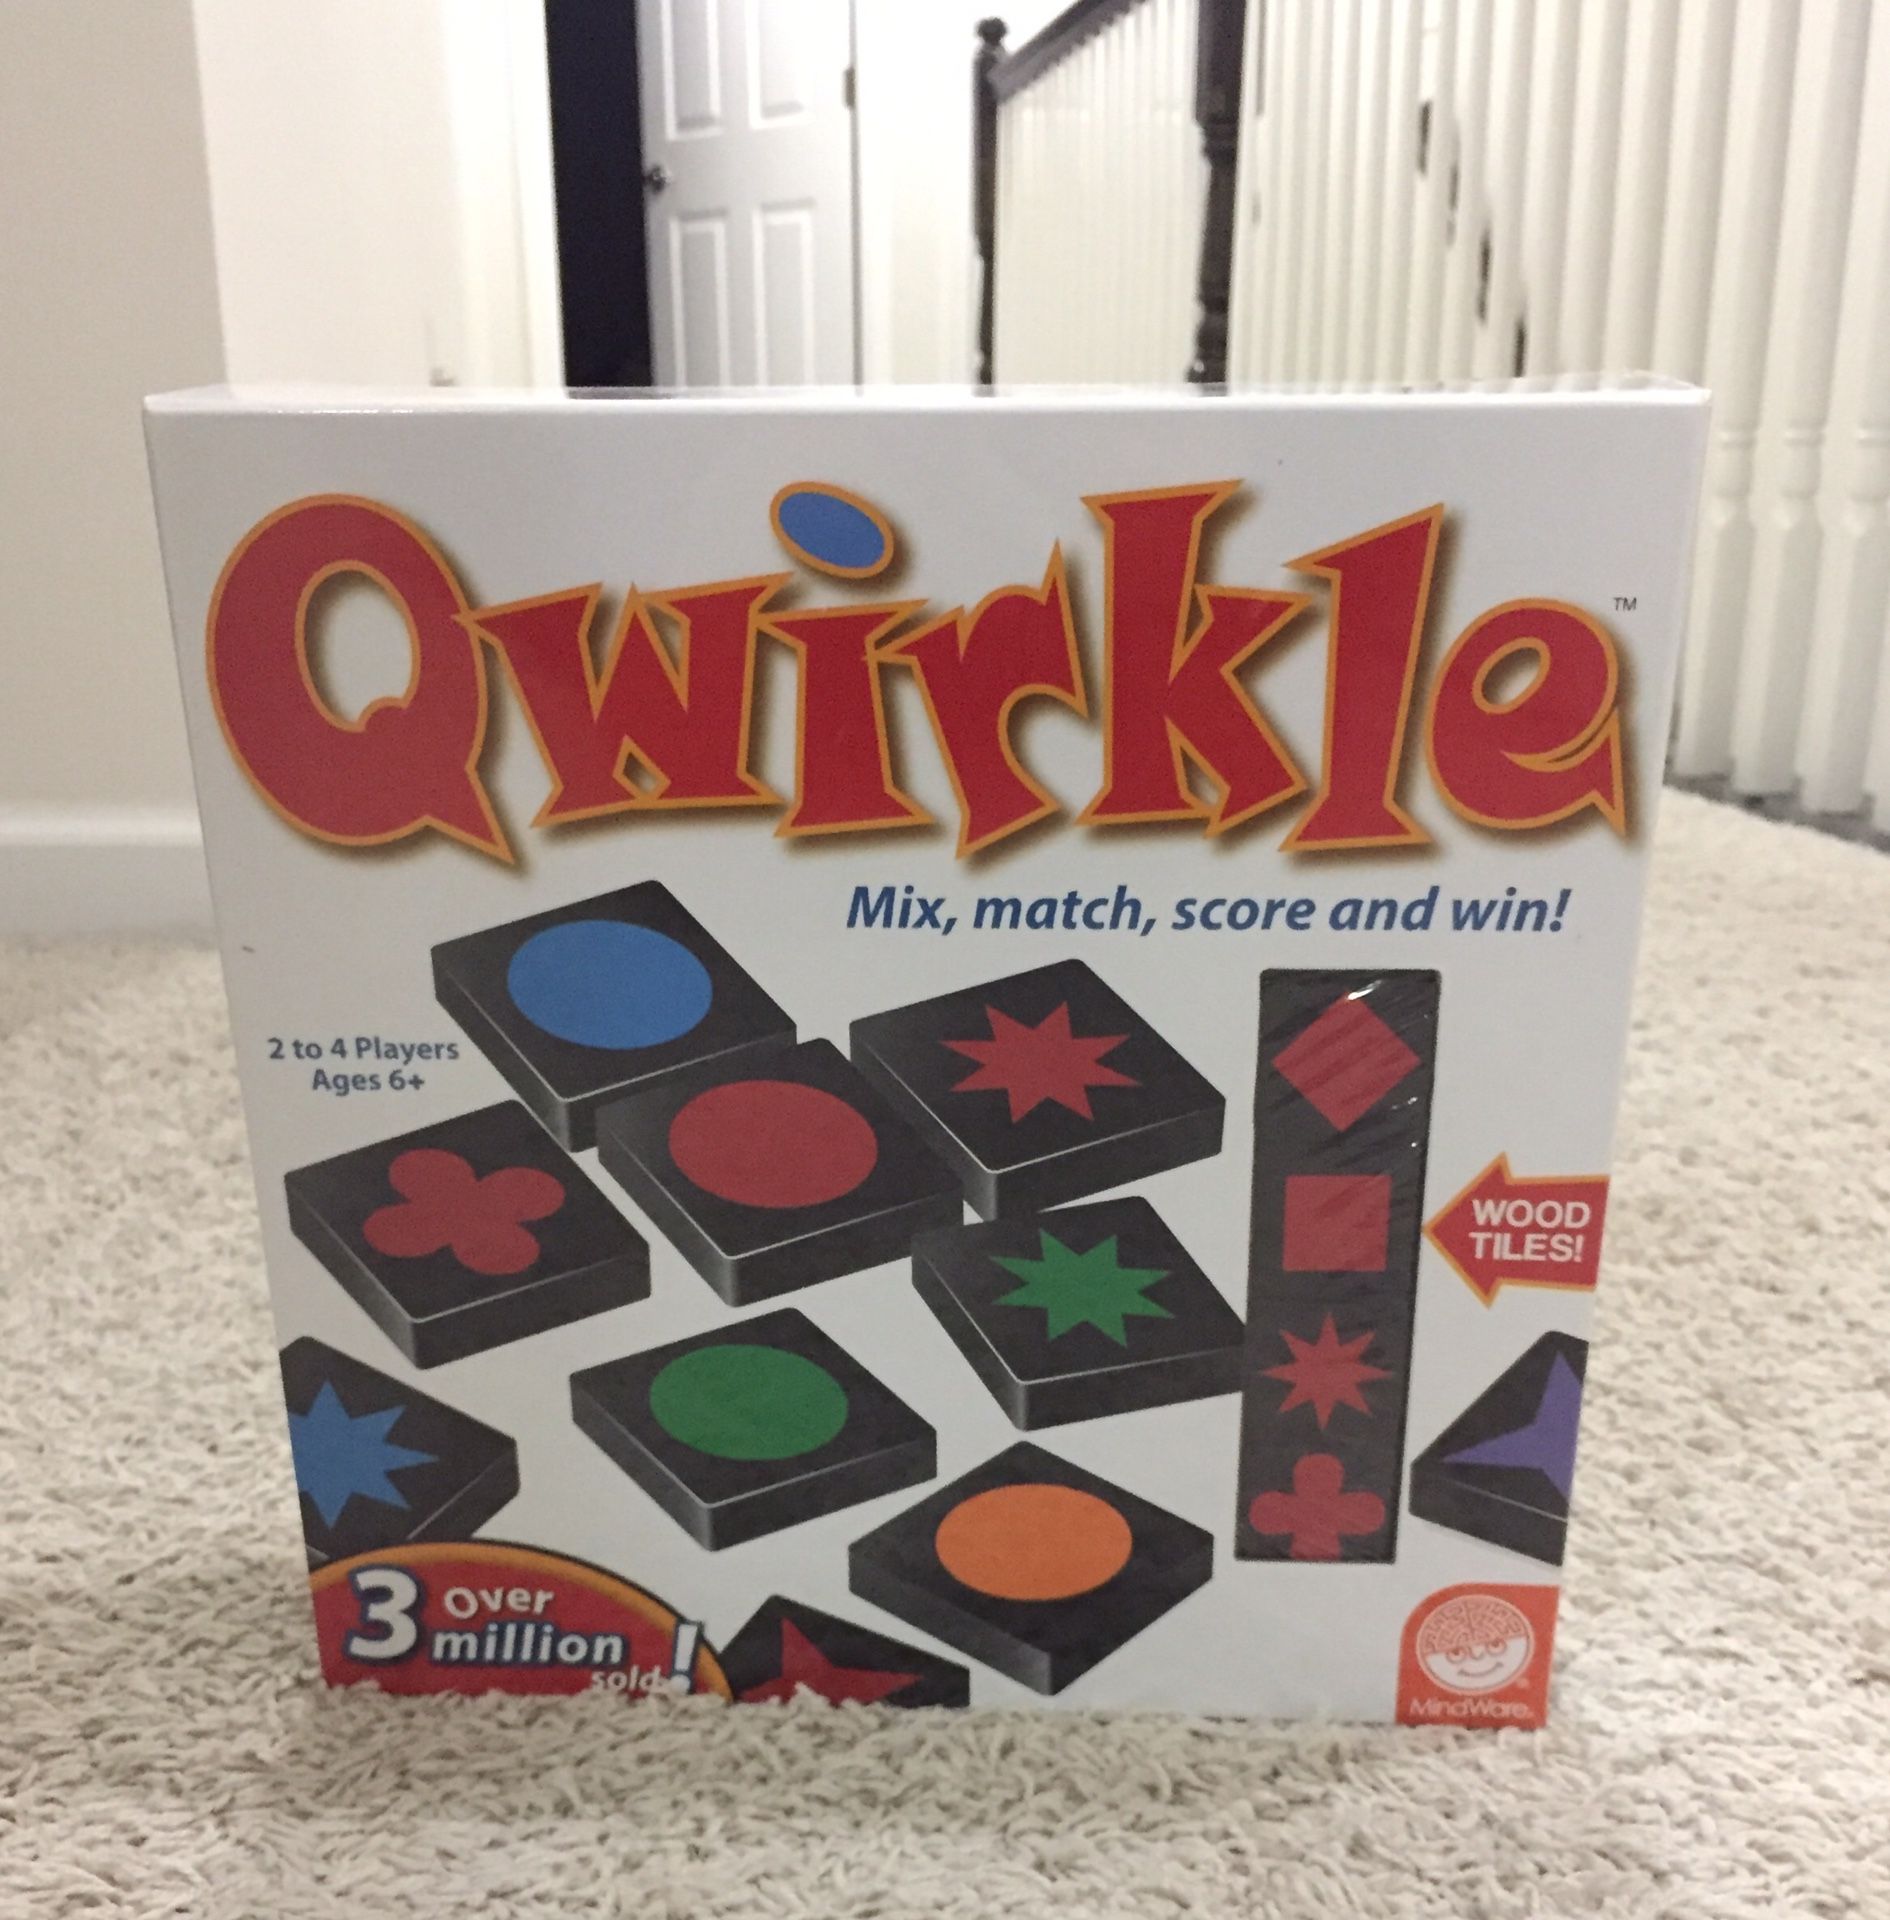 *New* Quirkle Board Game - Wood Tiles